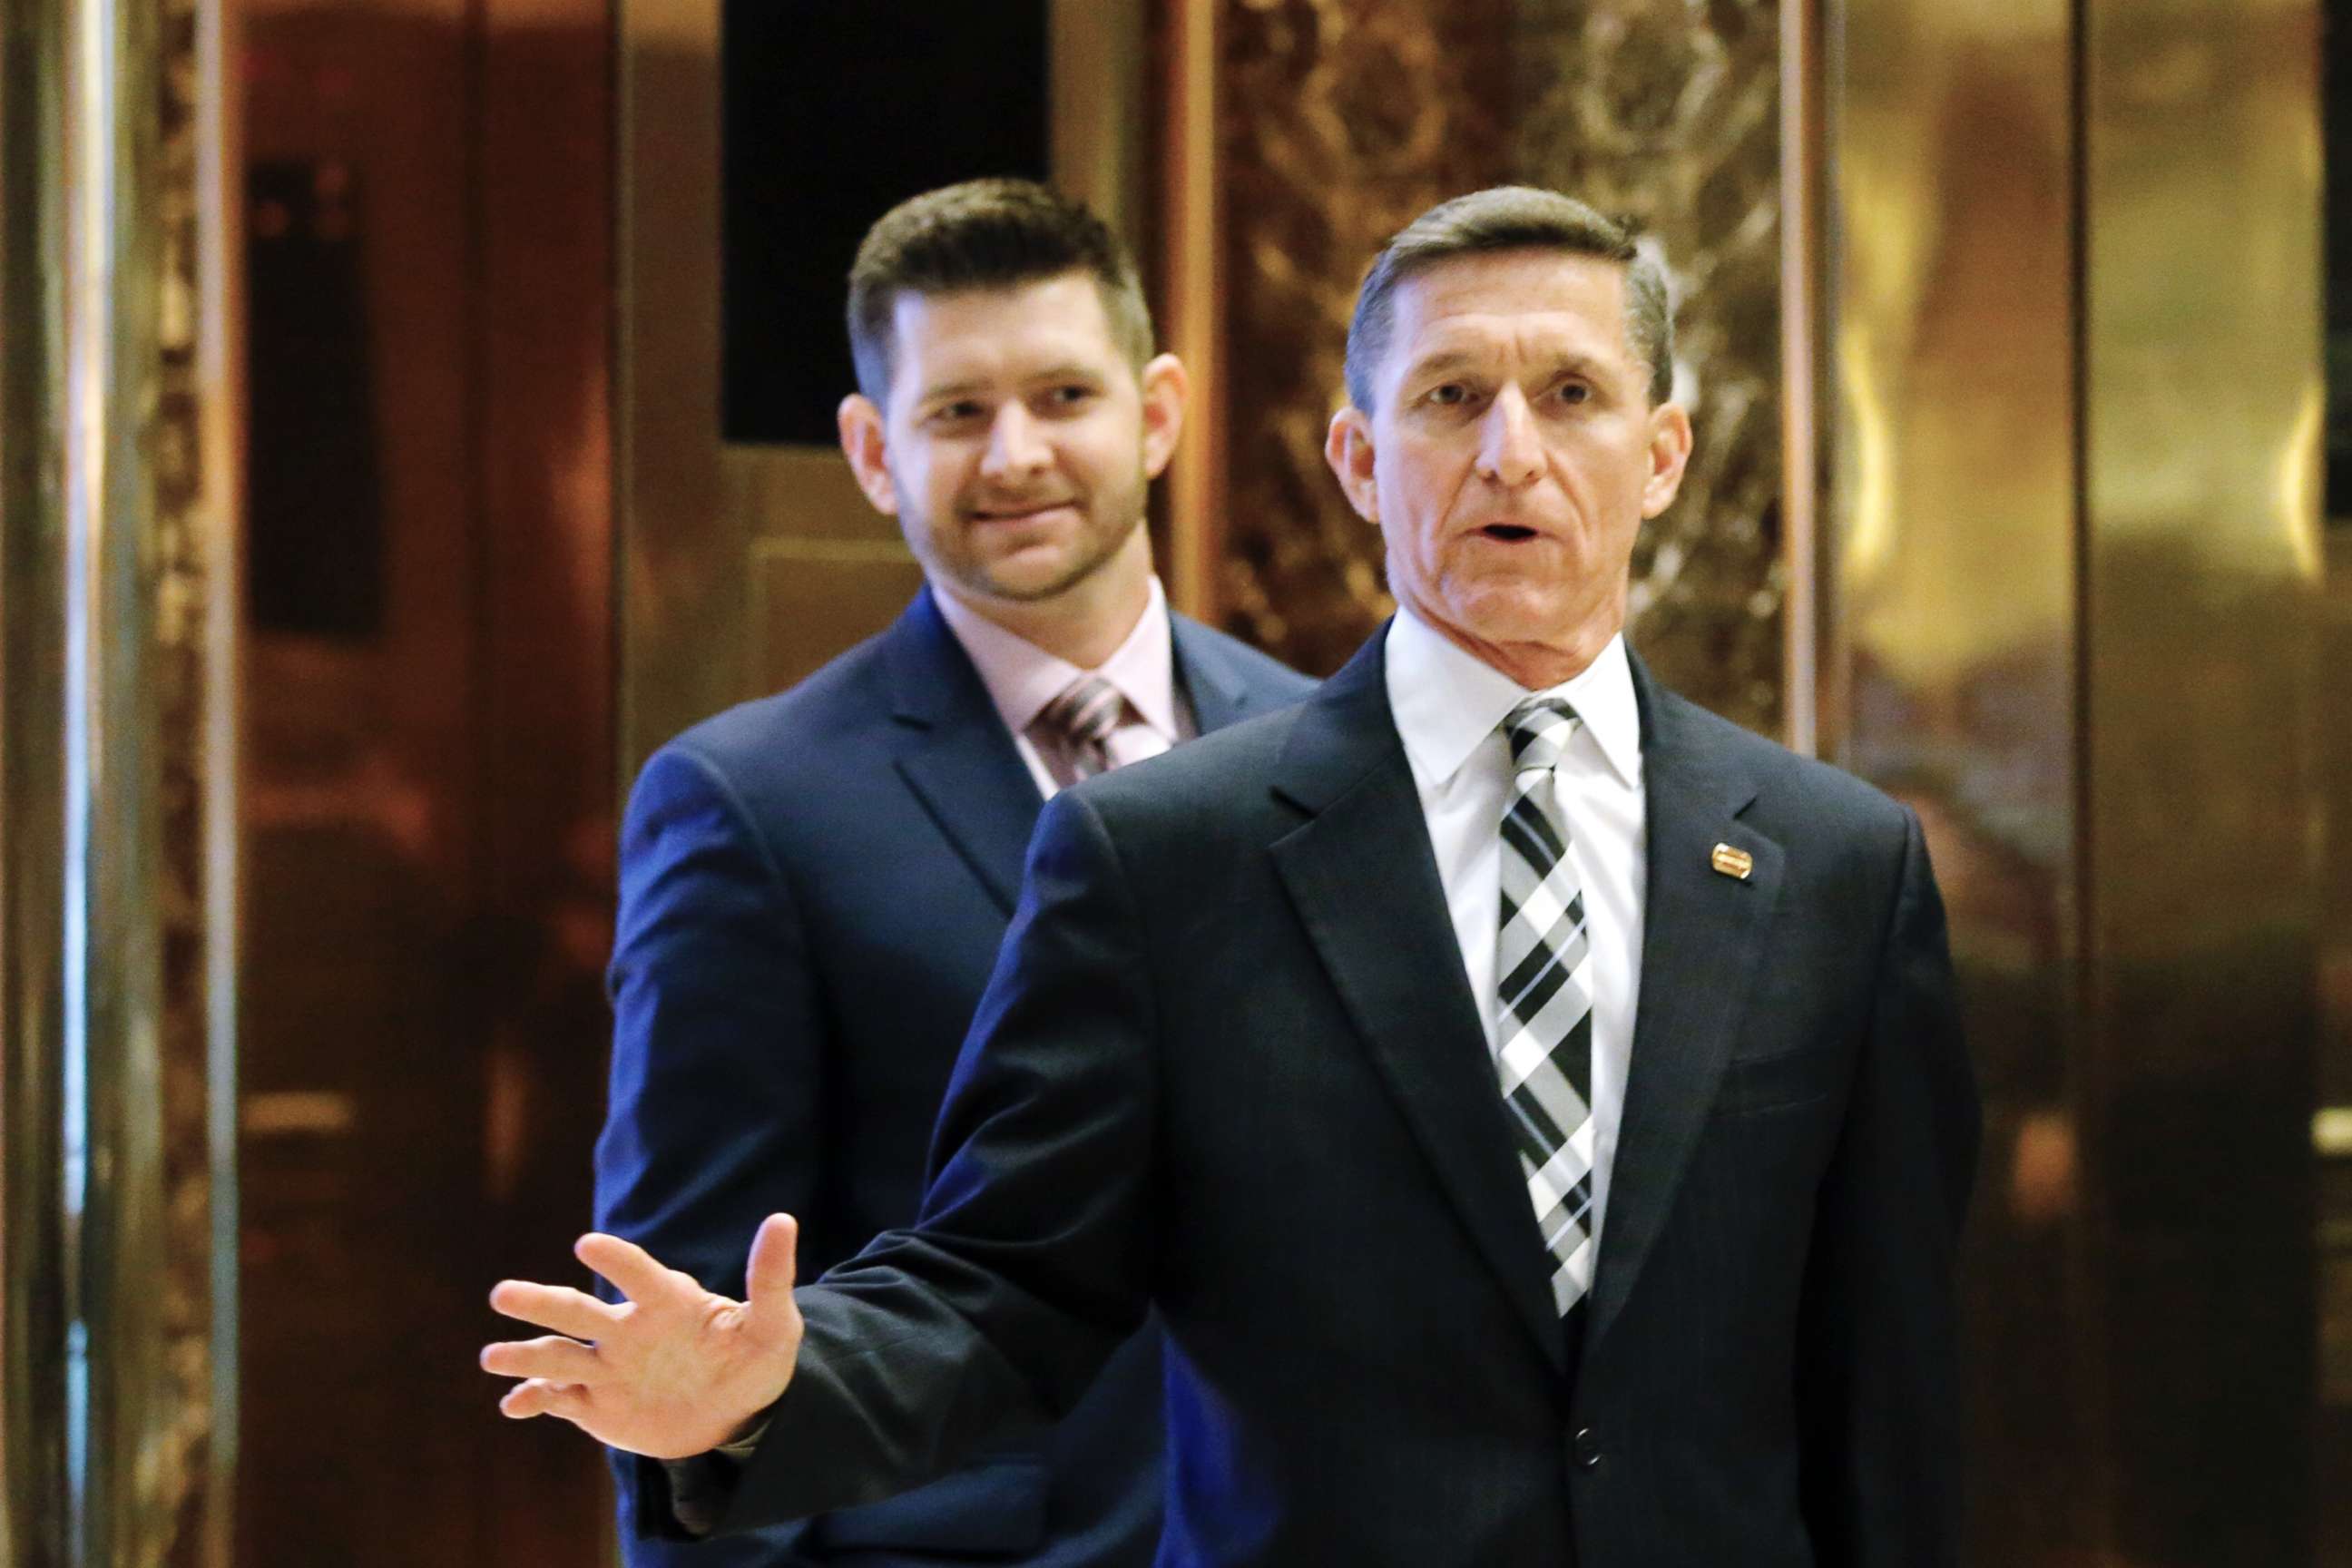 PHOTO: In this file photo dated Nov. 17, 2016, Michael Flynn Jr. is seen behind his father, retired Lt. Gen. Michael Flynn, as they arrive at Trump Tower in New York City.   